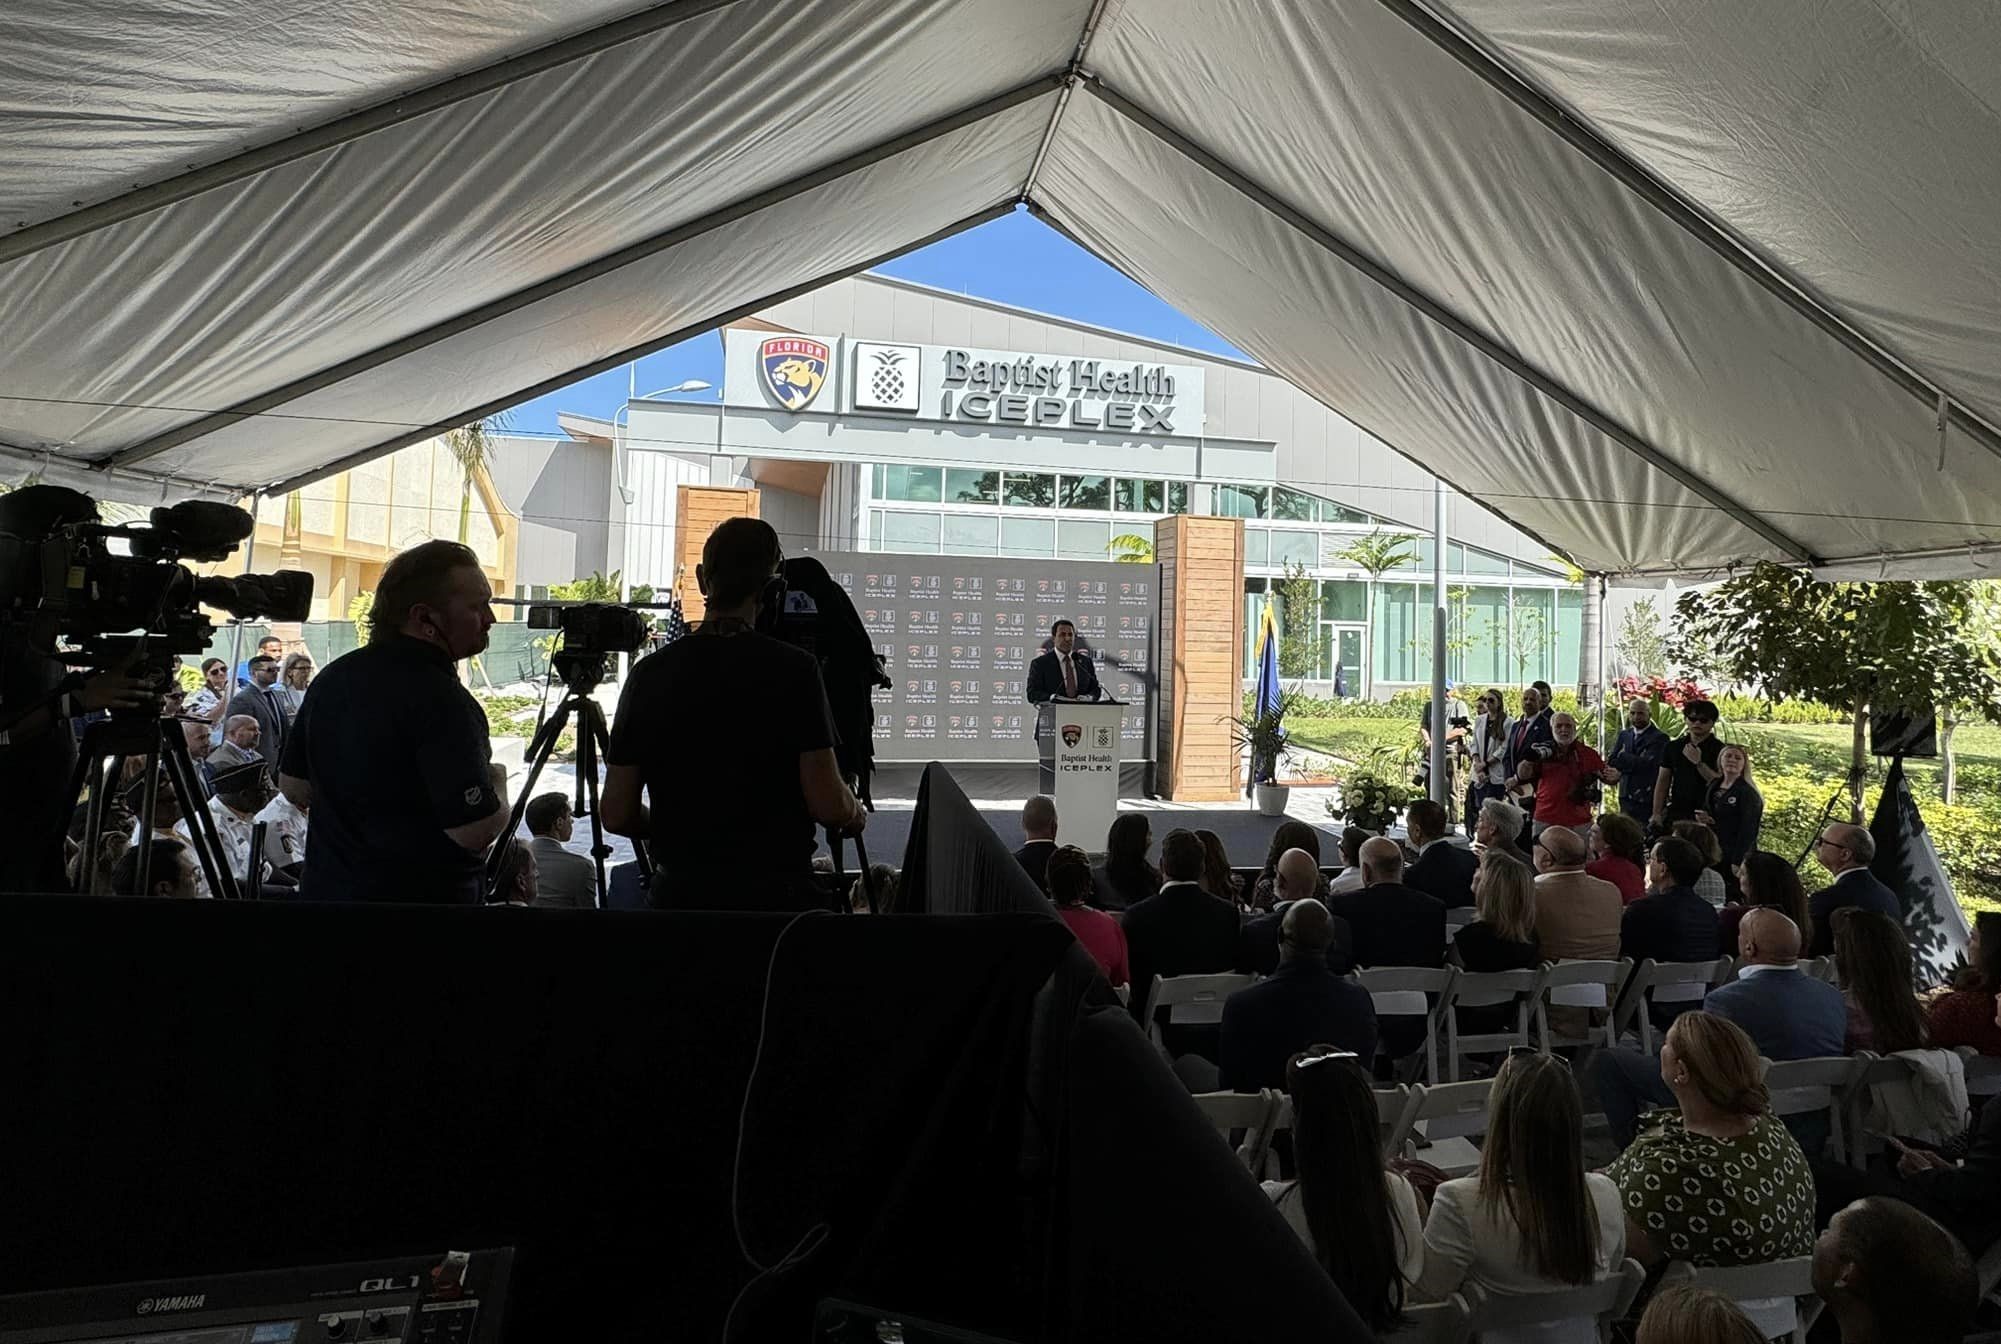 Florida Panthers ribbon-cutting ceremony at their new practice facility, FTL War Memorial. We provided lighting, audio, video monitors and a center LED wall behind the stage for the presentations by Panthers' broadcasters and ownership, along with NHL leadership